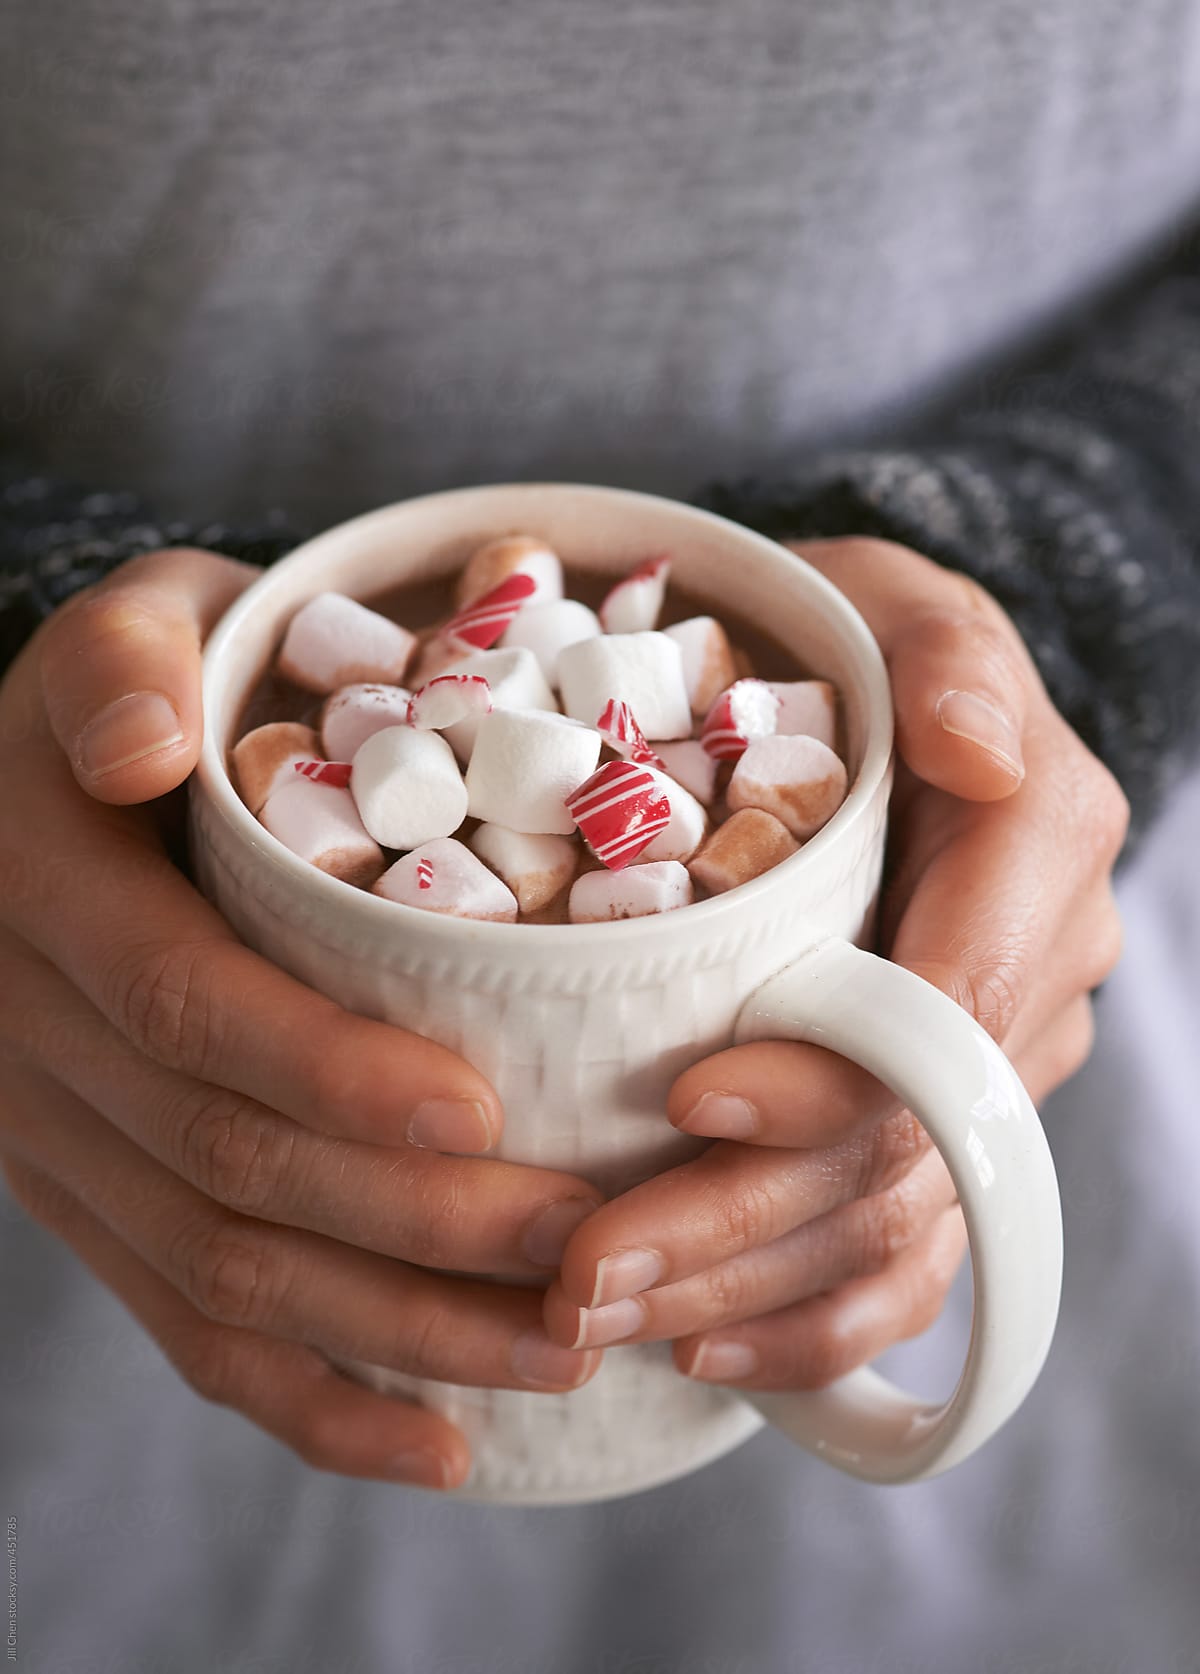 Hot chocolate with marshmallows and candy cane pieces